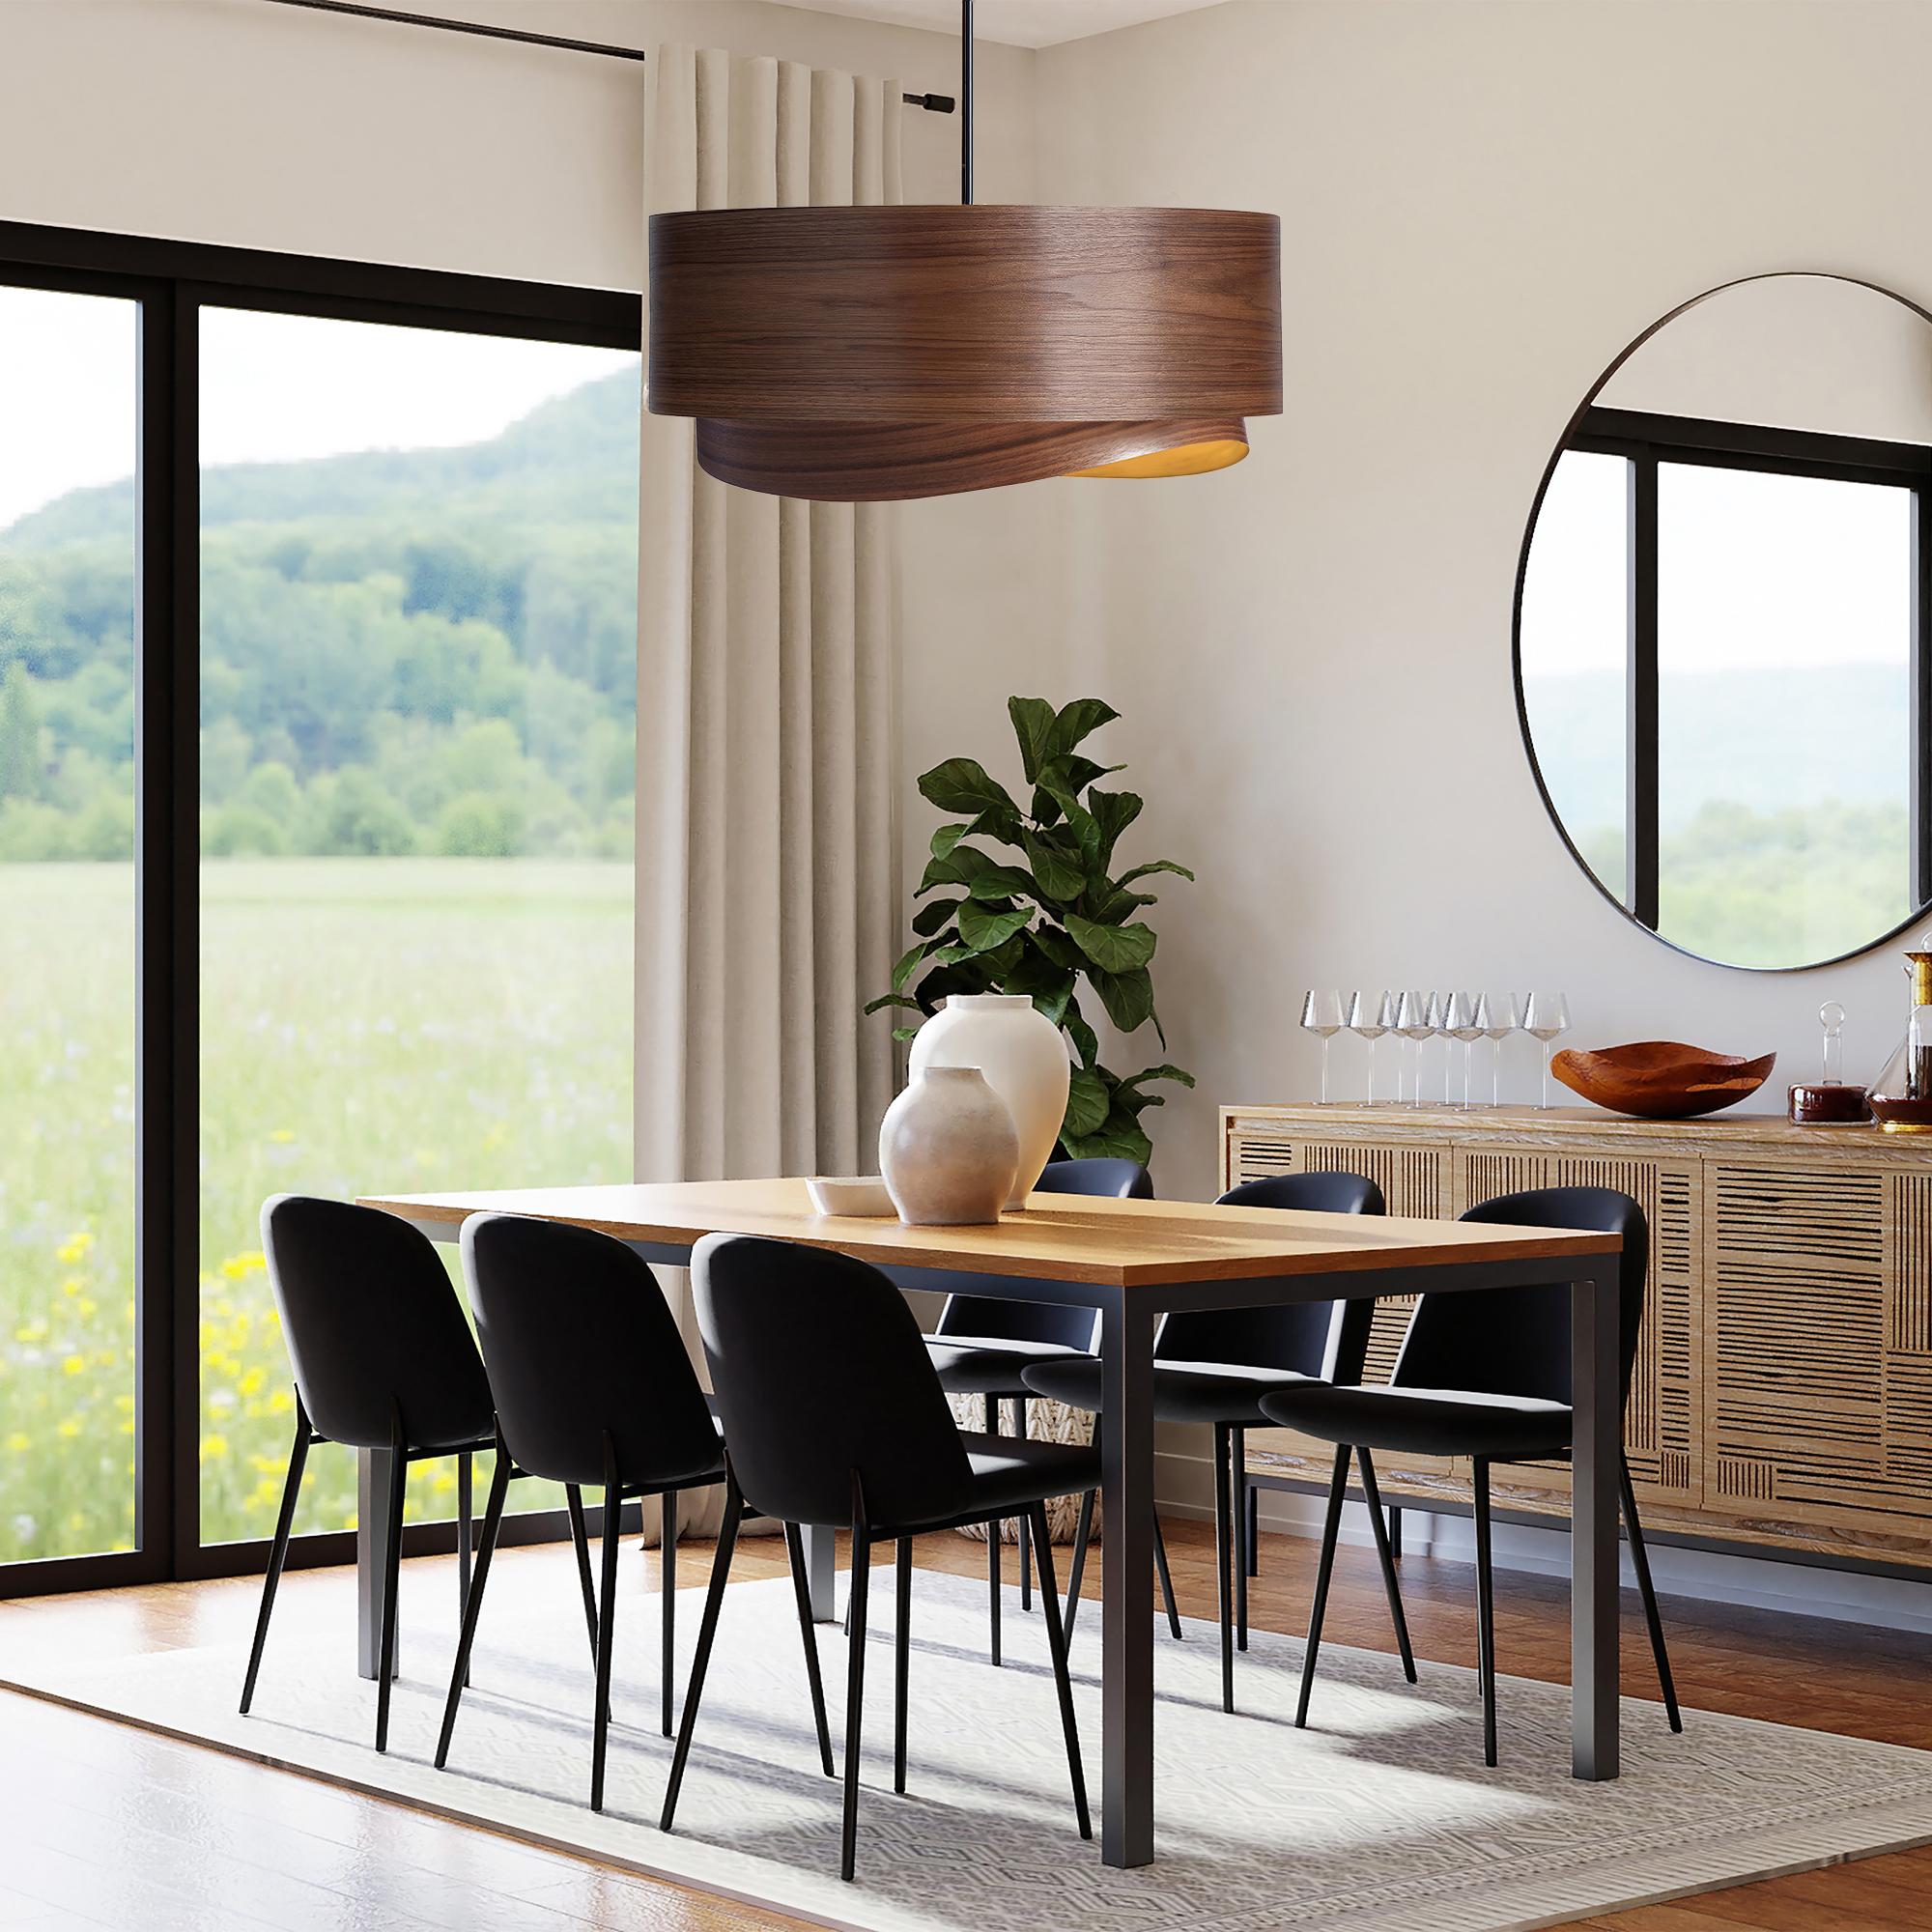 The Half BOWEN pendant light is a stunning, contemporary Mid-Century Modern light fixture with a Scandinavian composition and walnut wood veneer construction. This limited-edition piece is made with walnut wood, which is prized by designers for its